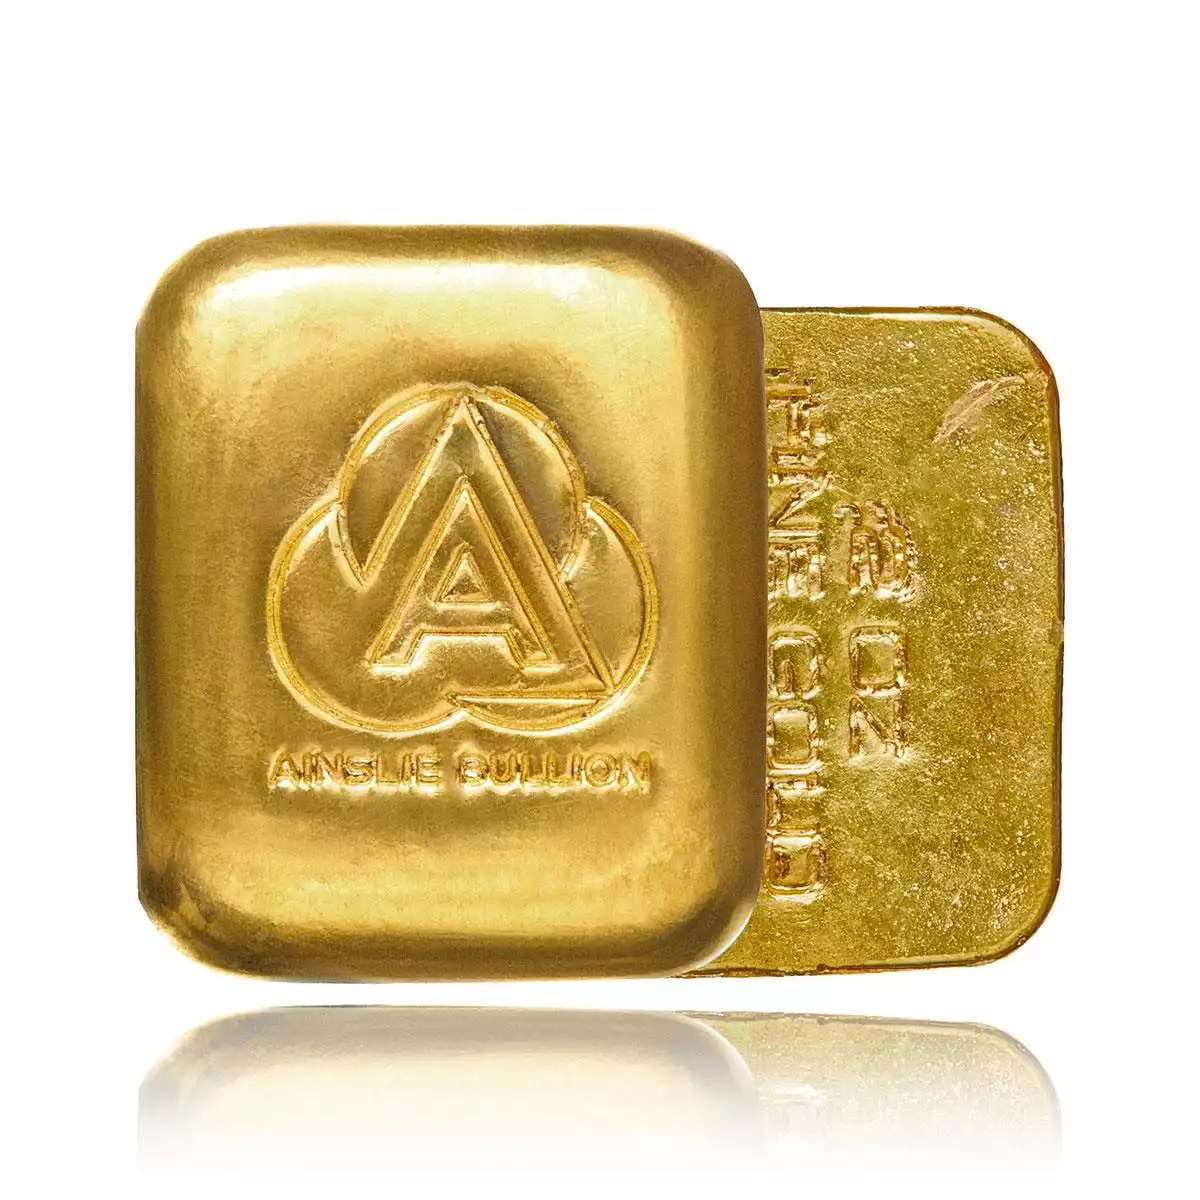 2oz ainslie gold bullionthis 2oz ainslie gold bar is a cast bar with each bar having a slightly unique surface pattern. each gold bar is struck with t...